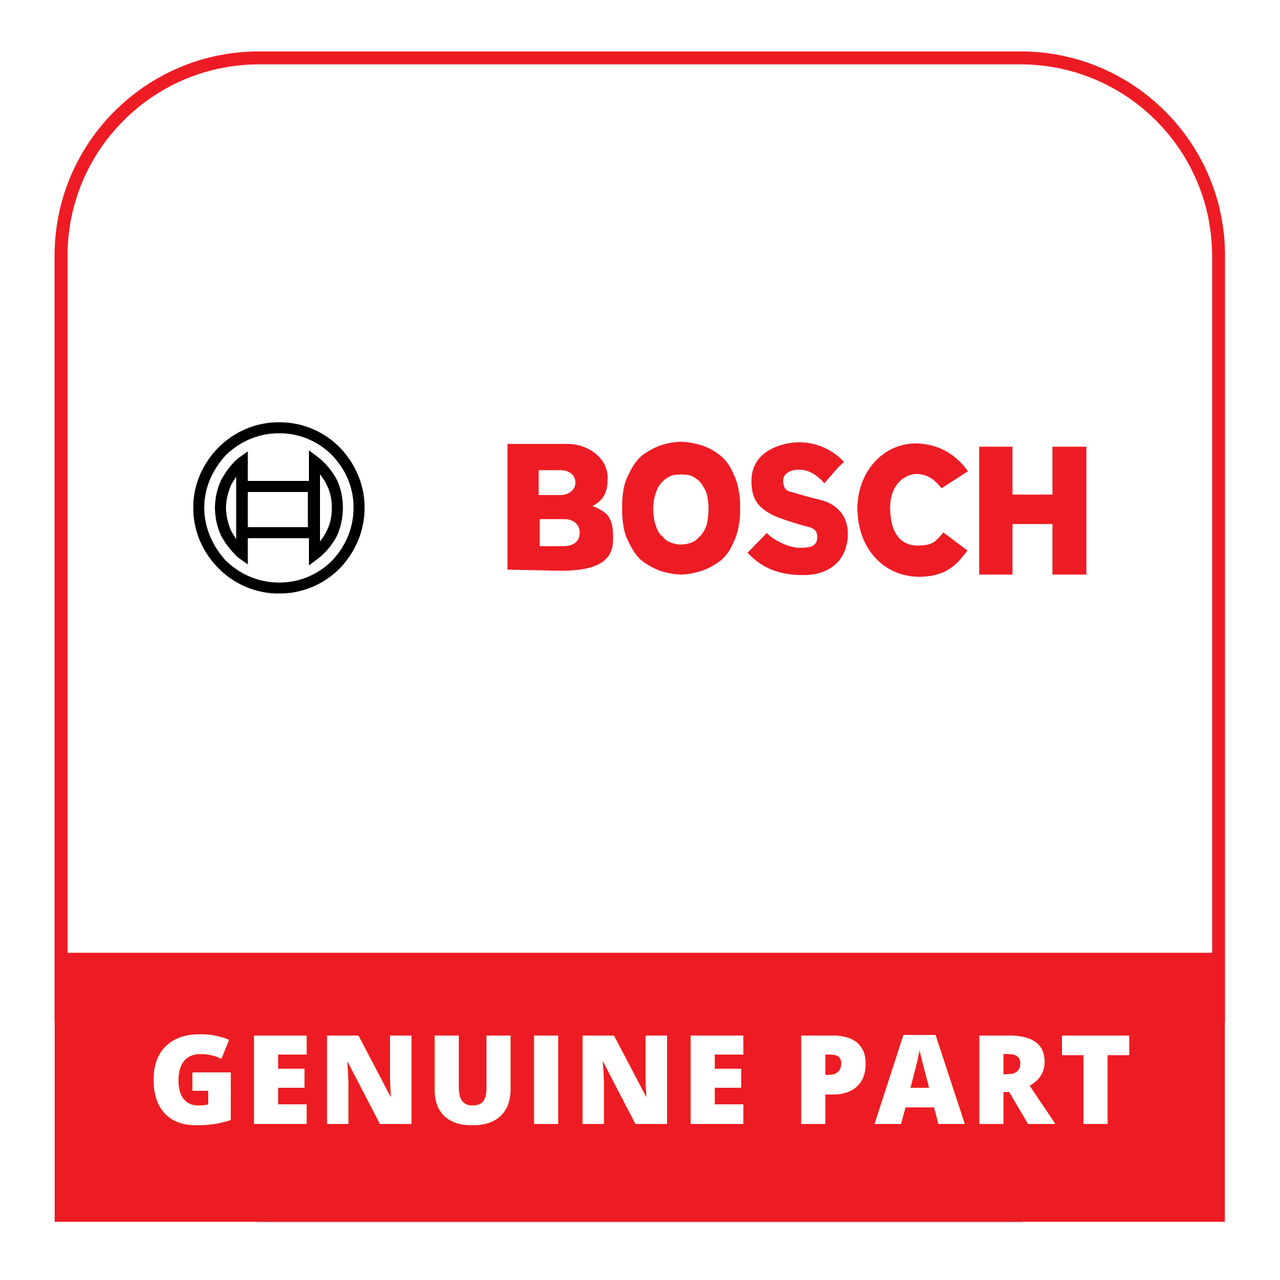 Bosch (Thermador) 12042451 - Control Module Not Programmed - Genuine Bosch (Thermador) Part